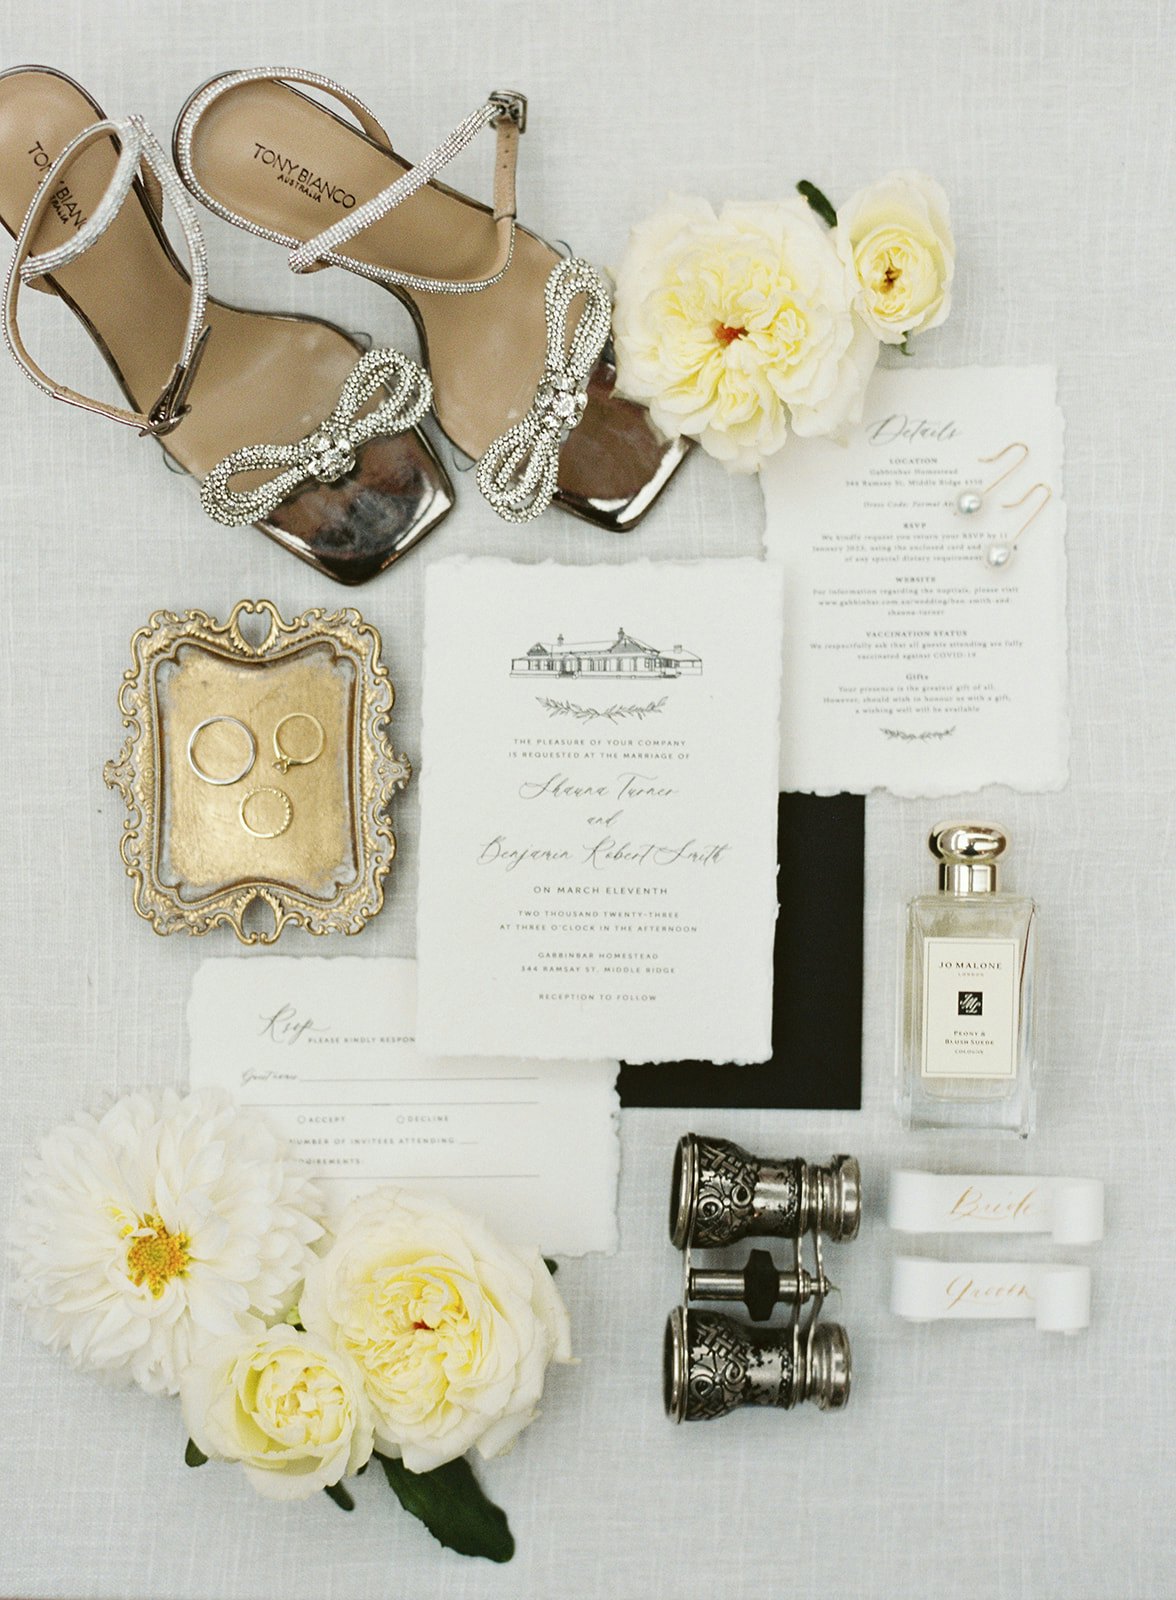 Wedding day shoes, invitation and rings